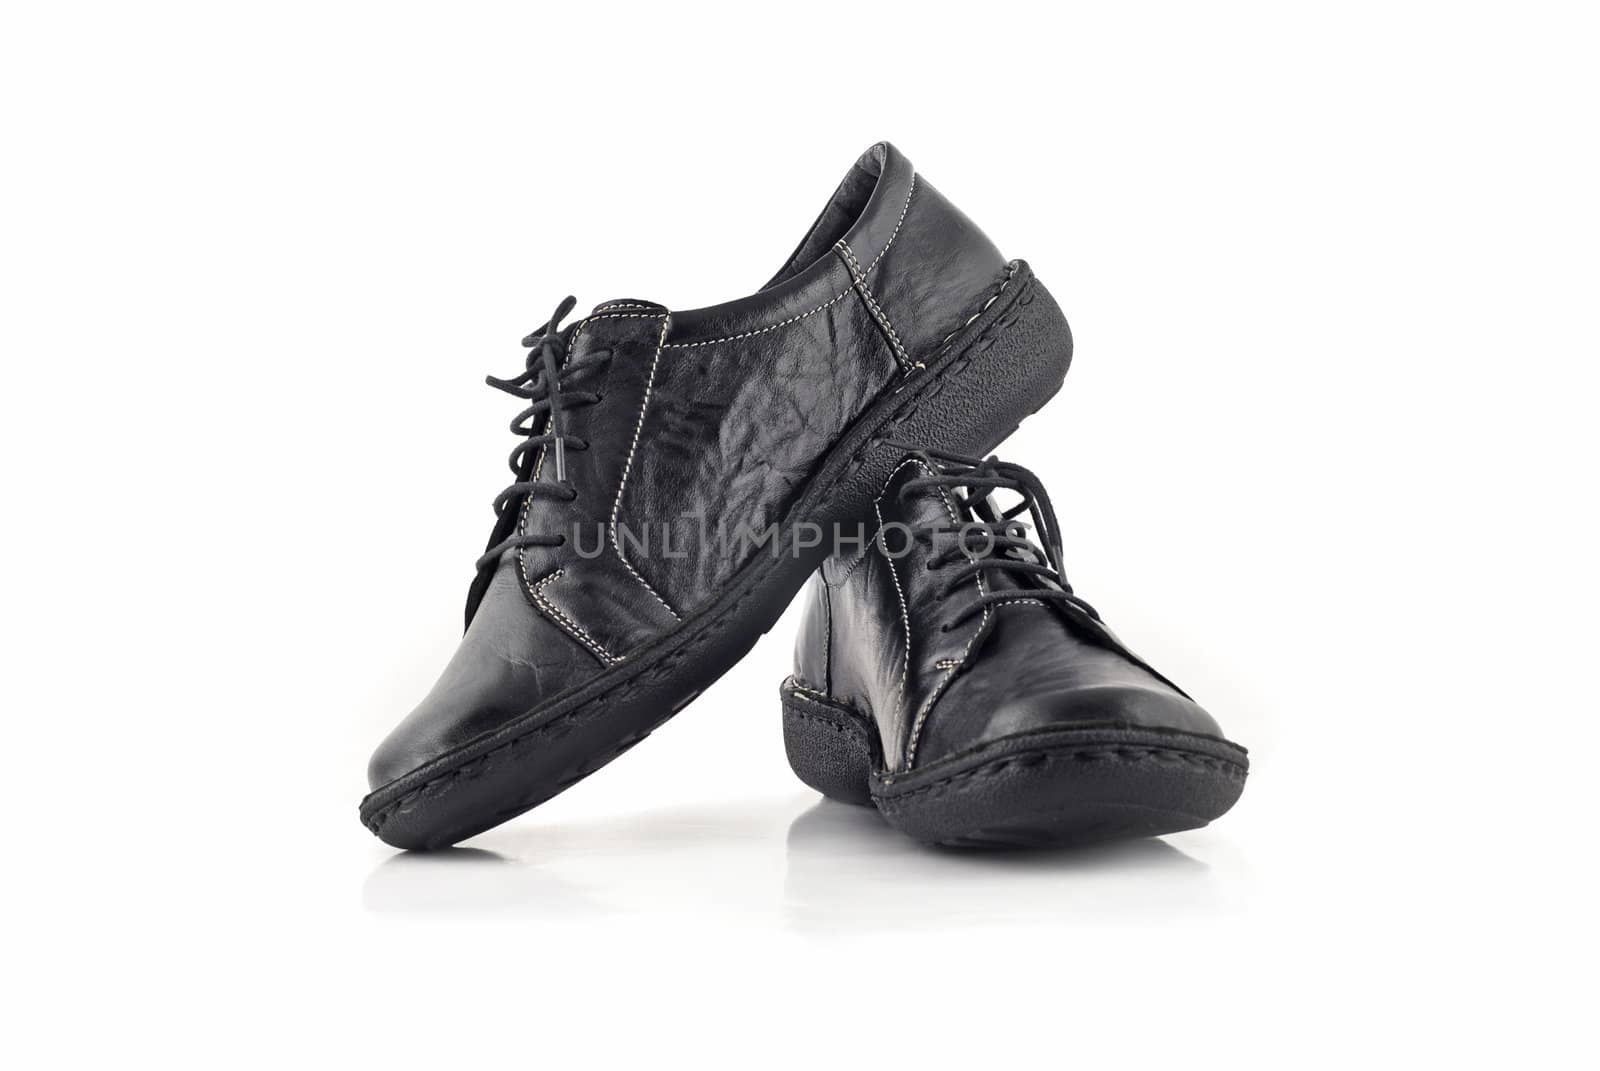 Pair of black leather women's shoes over white background